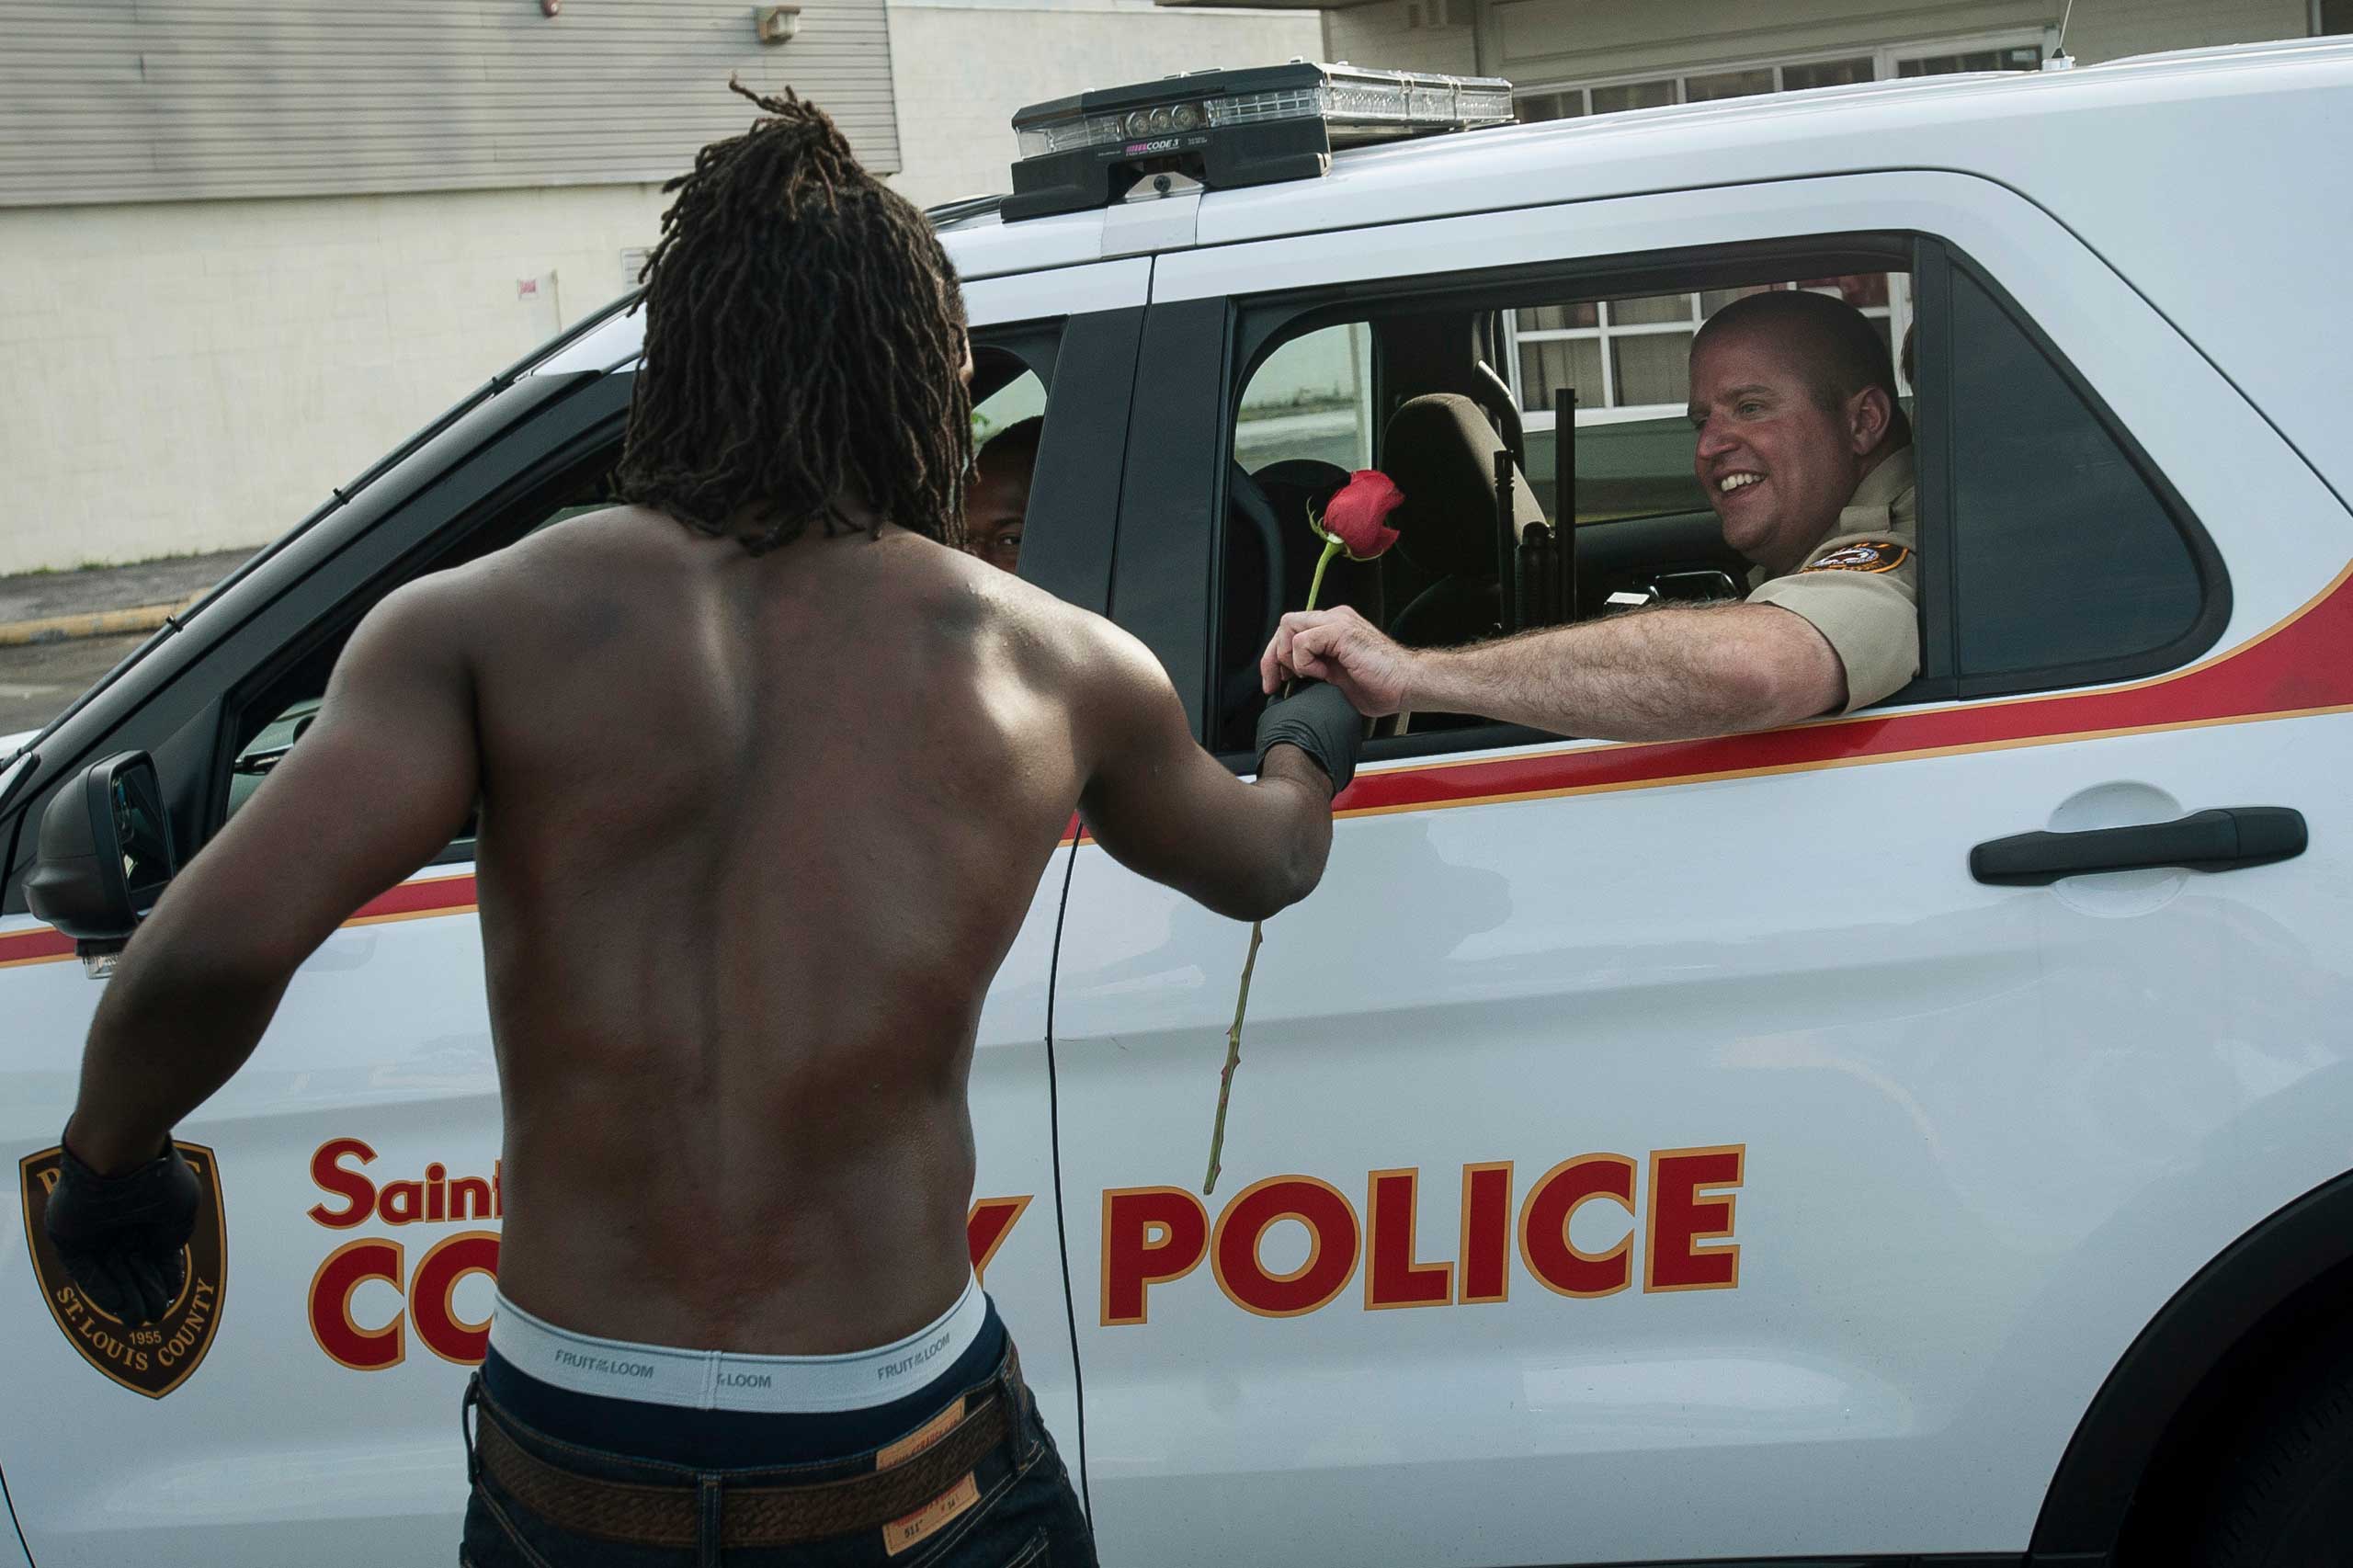 Resident John West hands a rose to a police officer during cleanup efforts in Ferguson, Mo. on Aug. 19, 2014. (Mark Kauzlarich—Reuters)